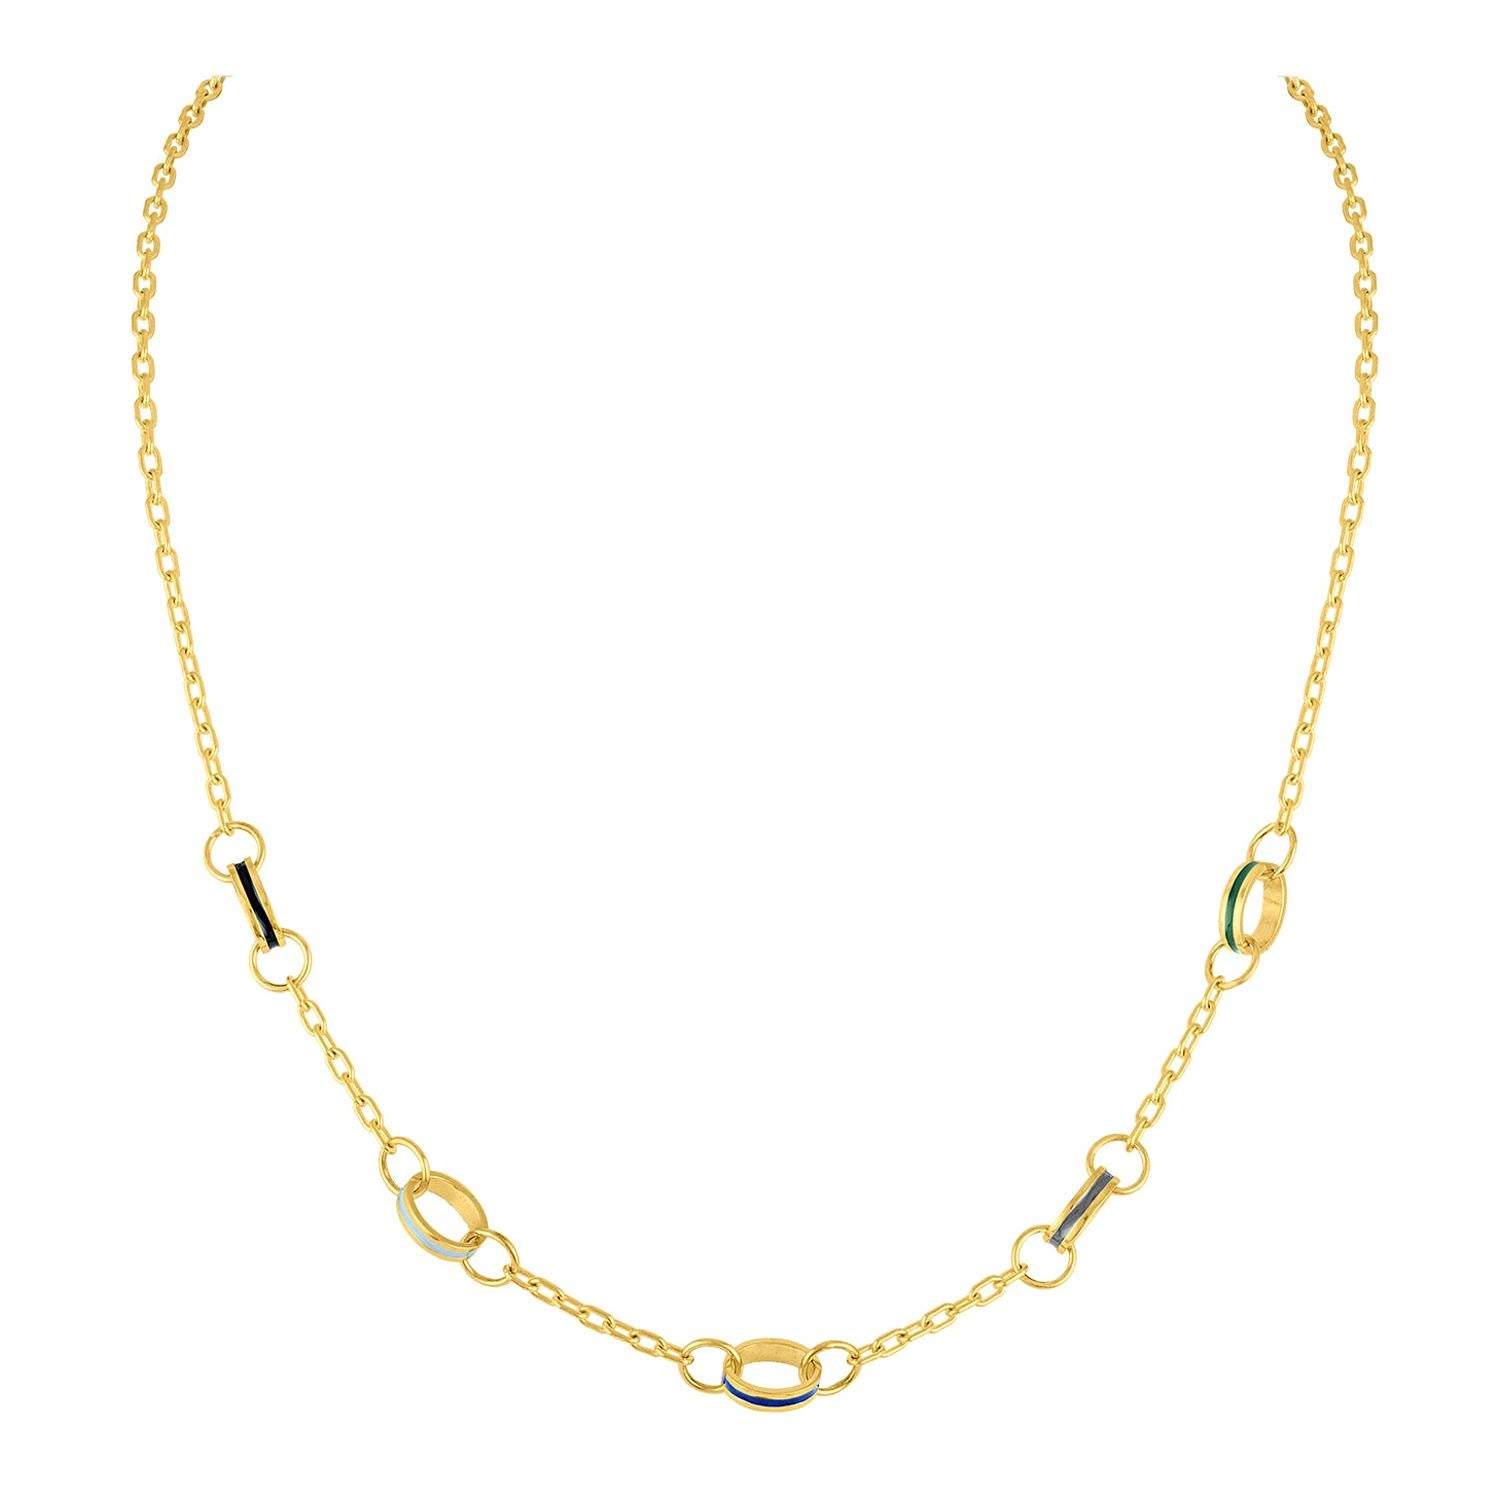 14 Karat Gold Chain with Colored Enamel Links